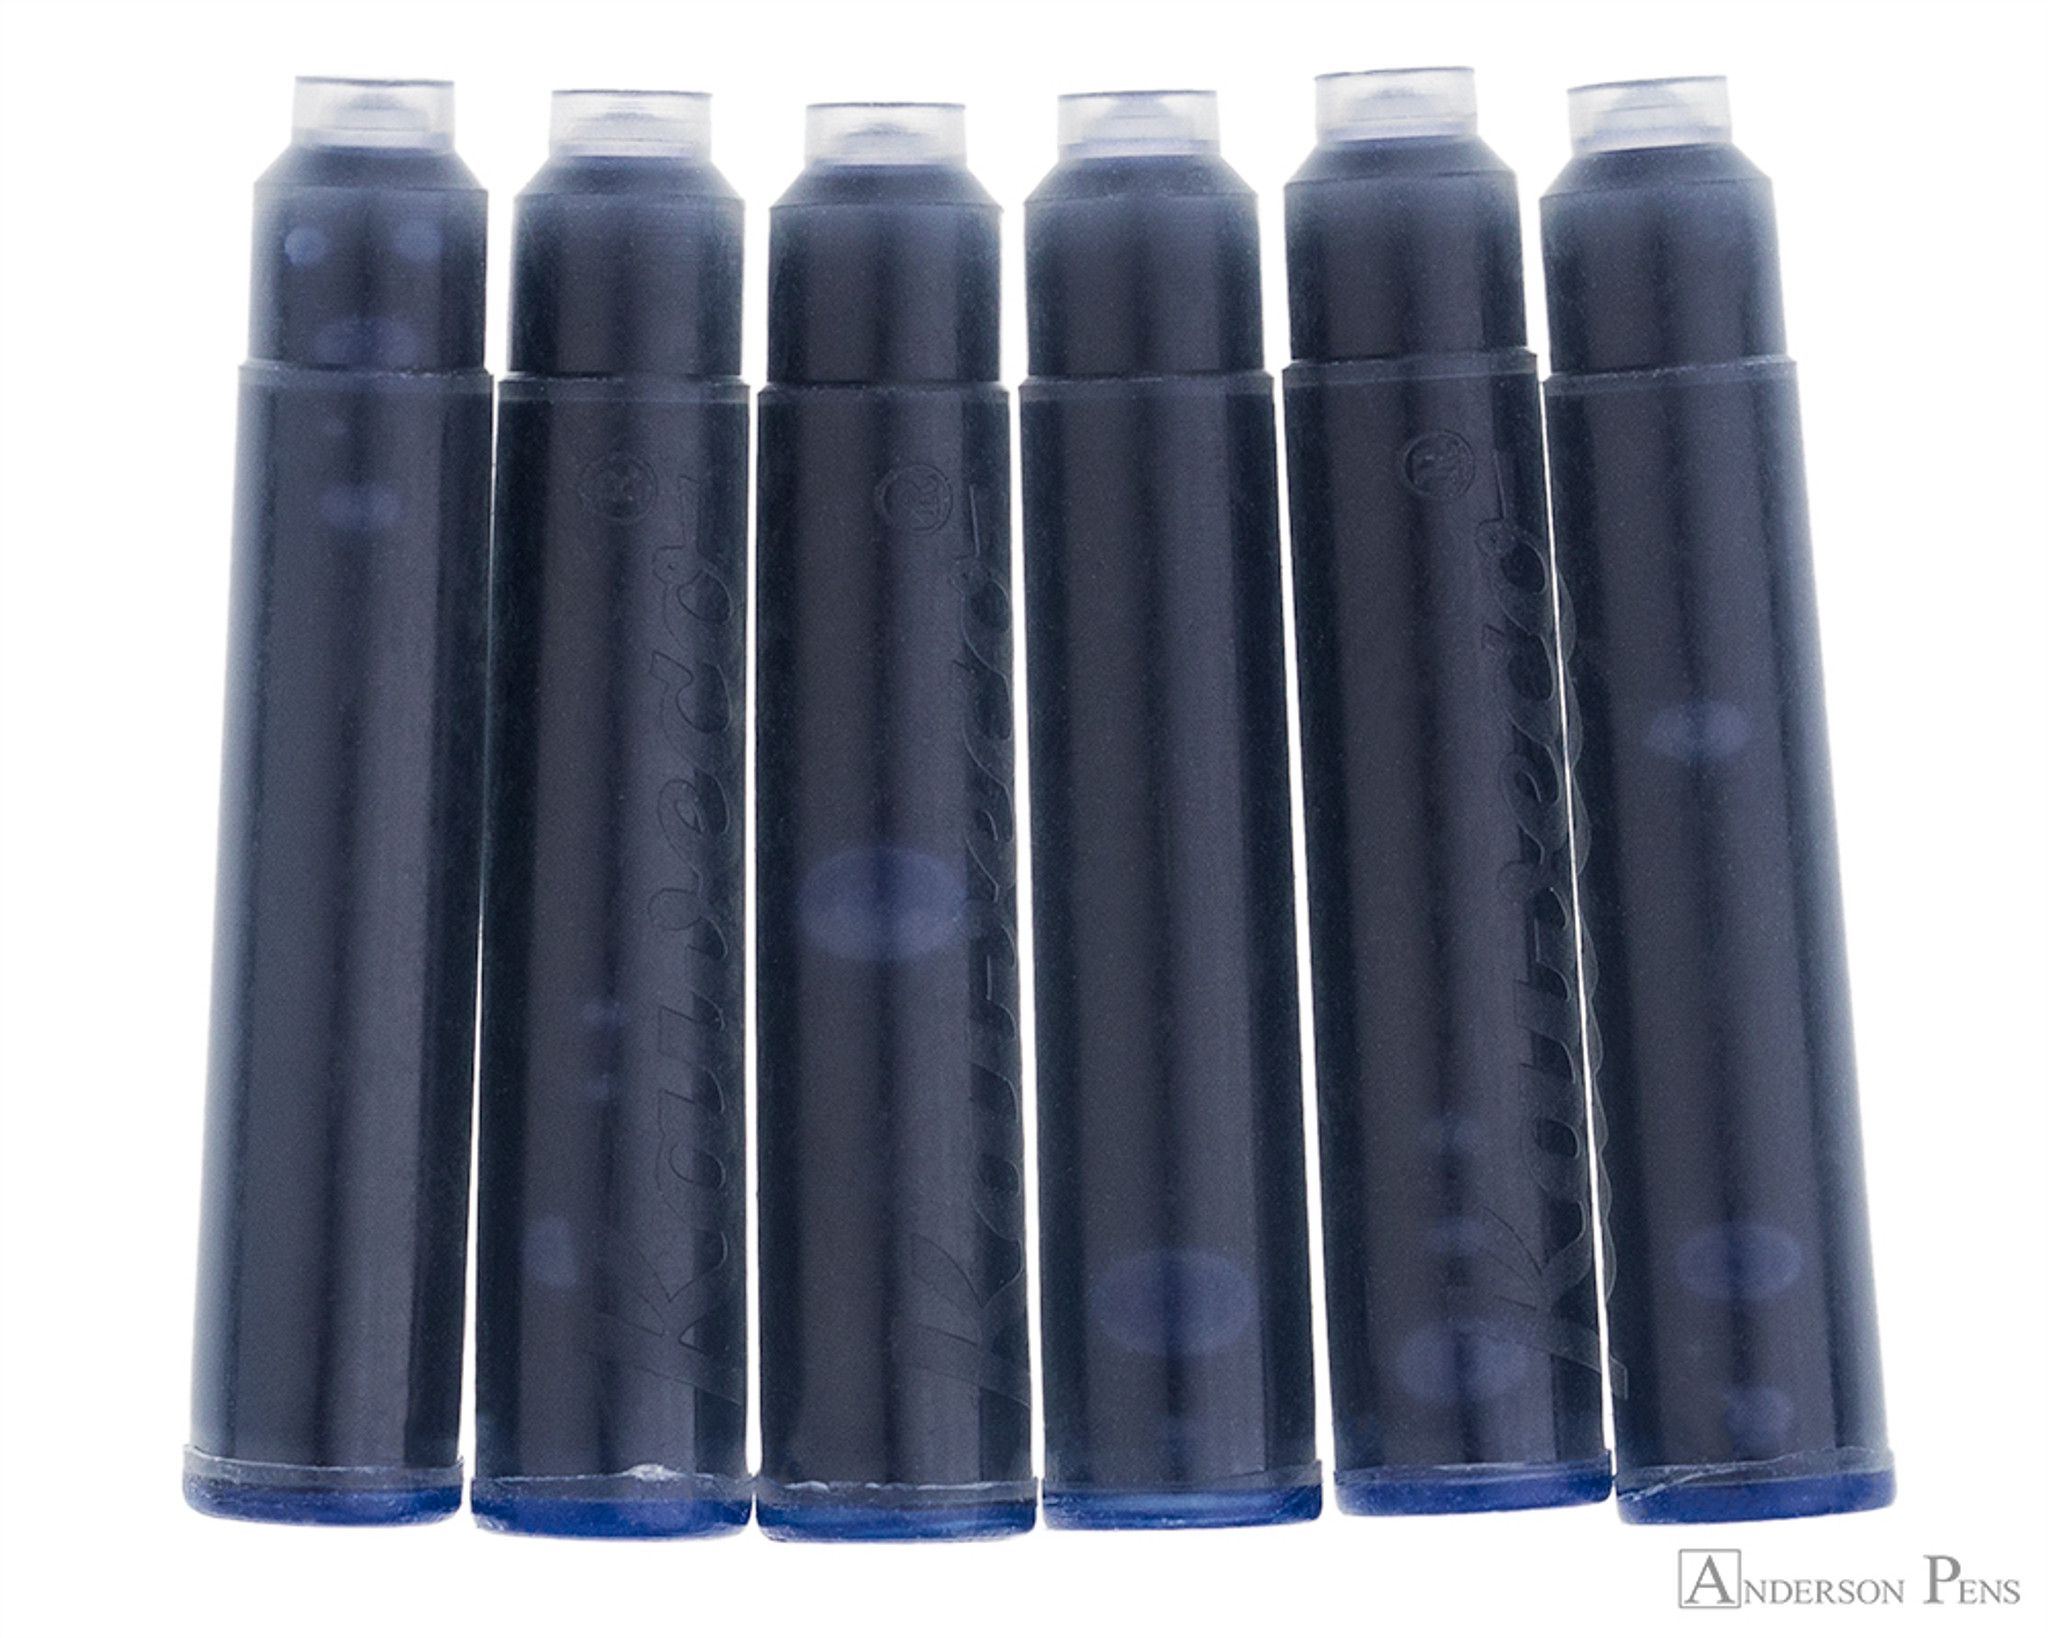 Midnight Blue Pack of 6 Kaweco Ink Cartridges